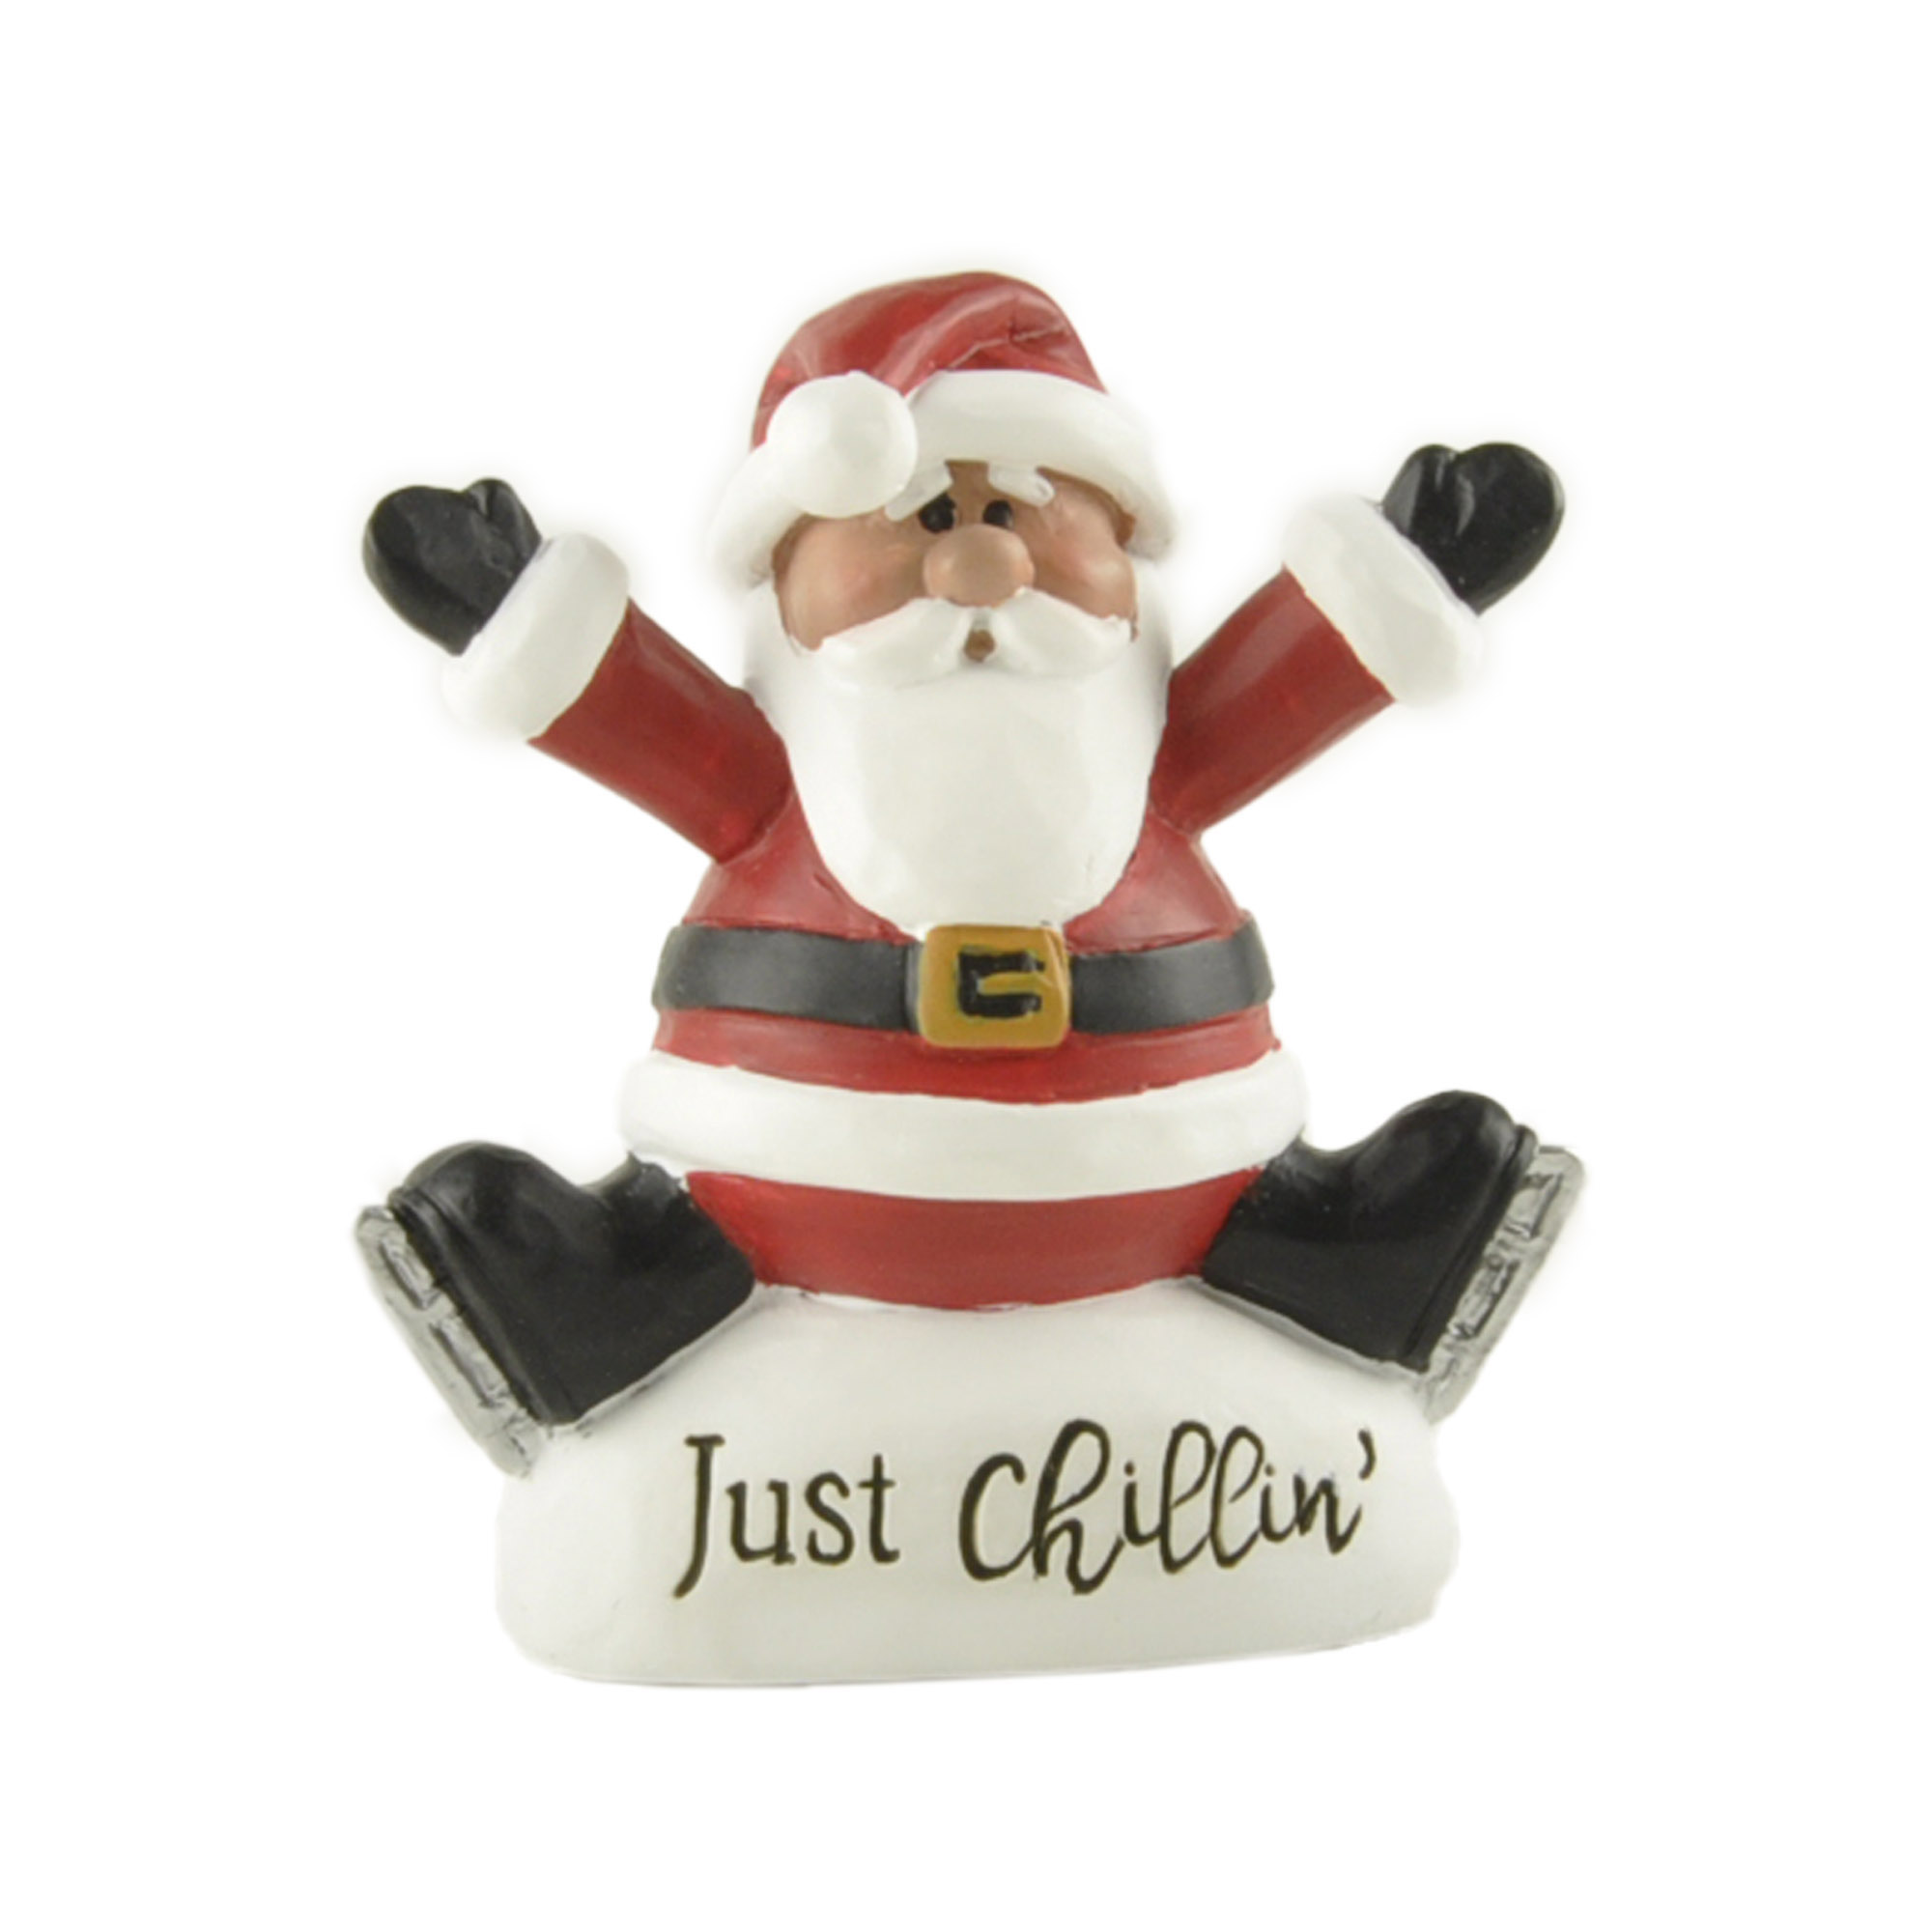 Relaxed Resin Santa Figurine with 'Just Chillin'' Inscription – Perfect Festive Decor for a Laid-Back Holiday Atmosphere 238-13912